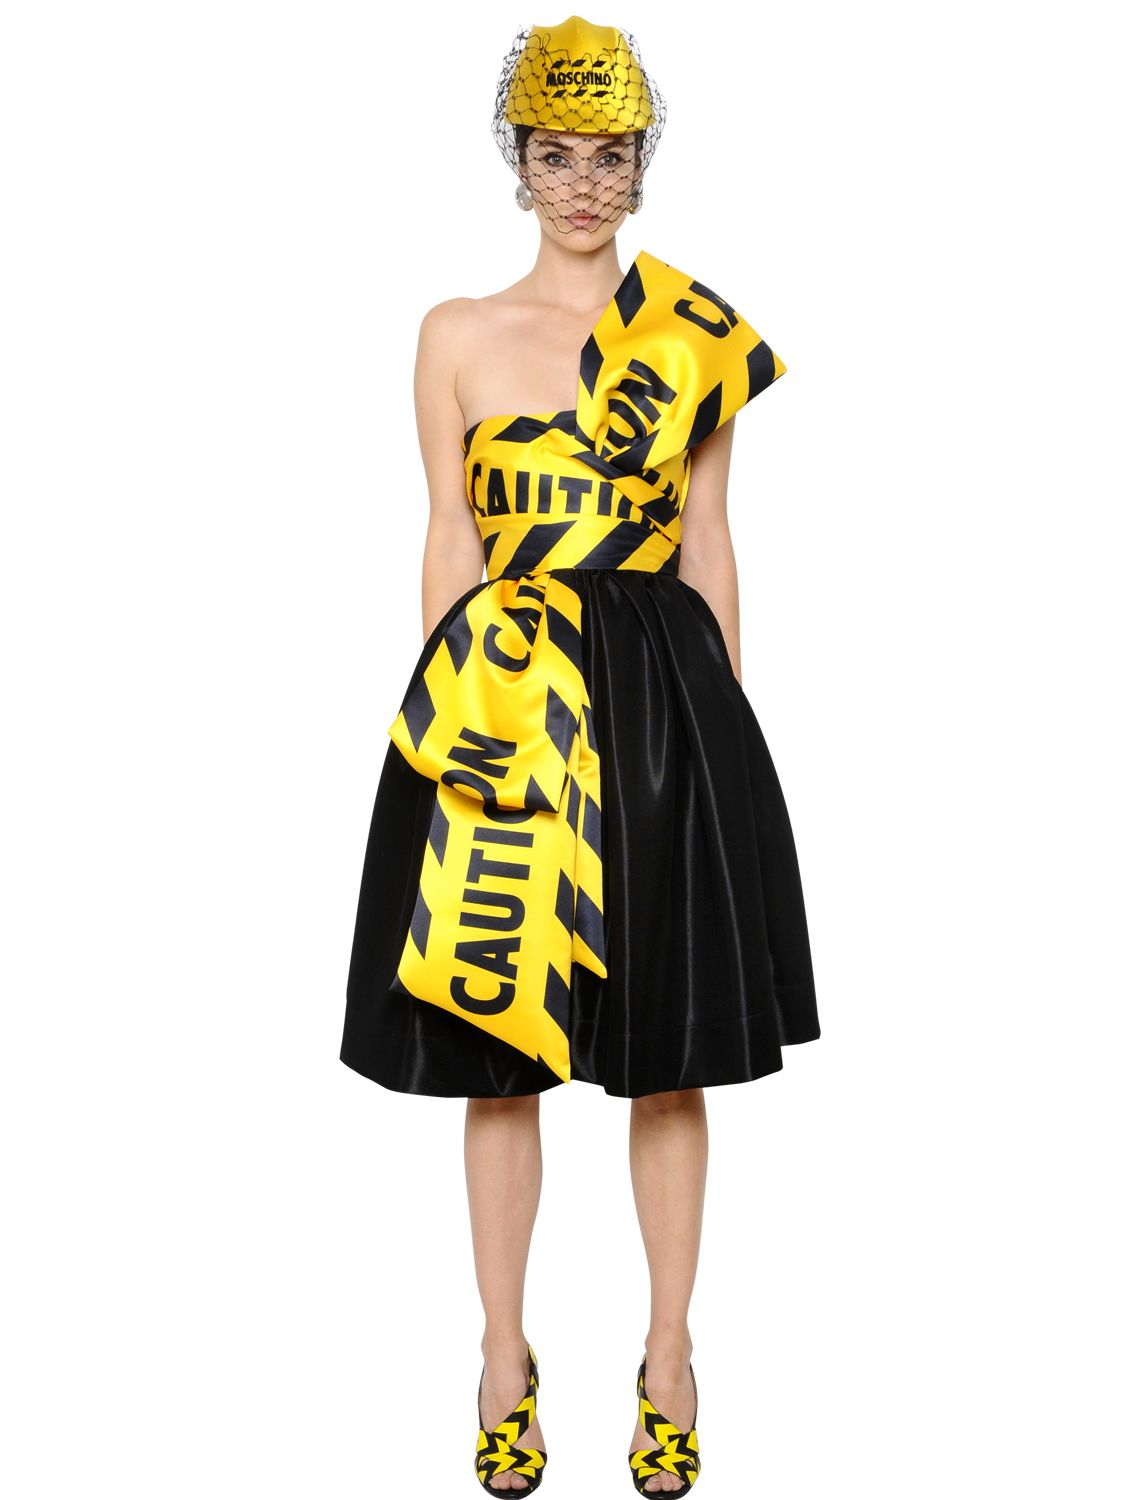 caution tape outfit